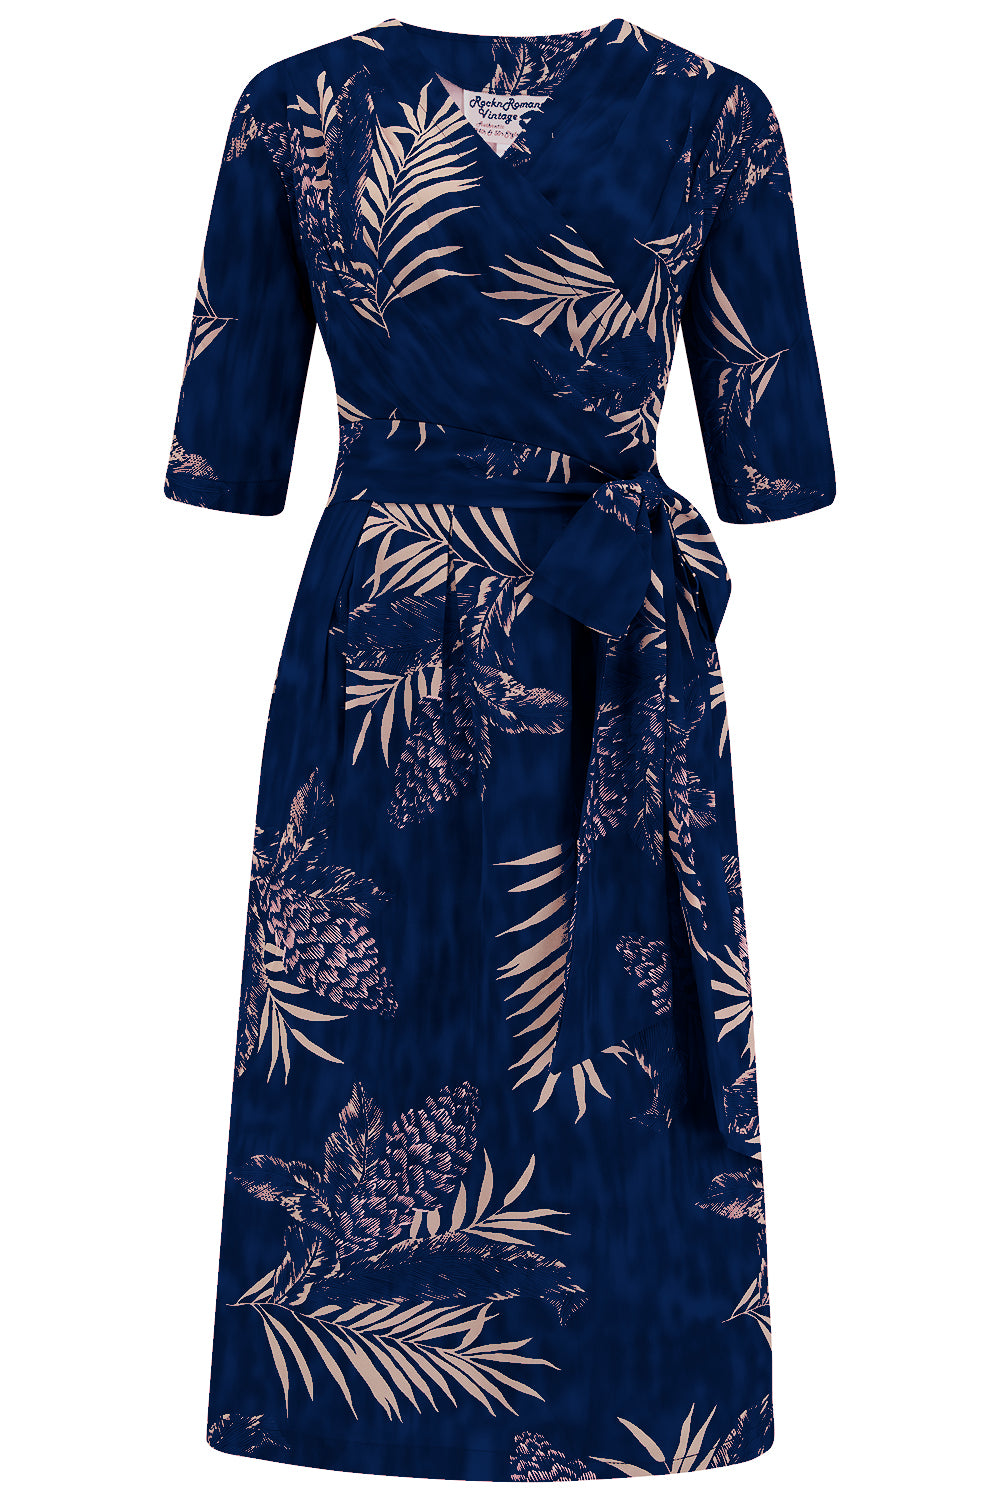 The "Vivien" Full Wrap Dress in Sapphire Palm, True 1940s To Early 1950s Style product